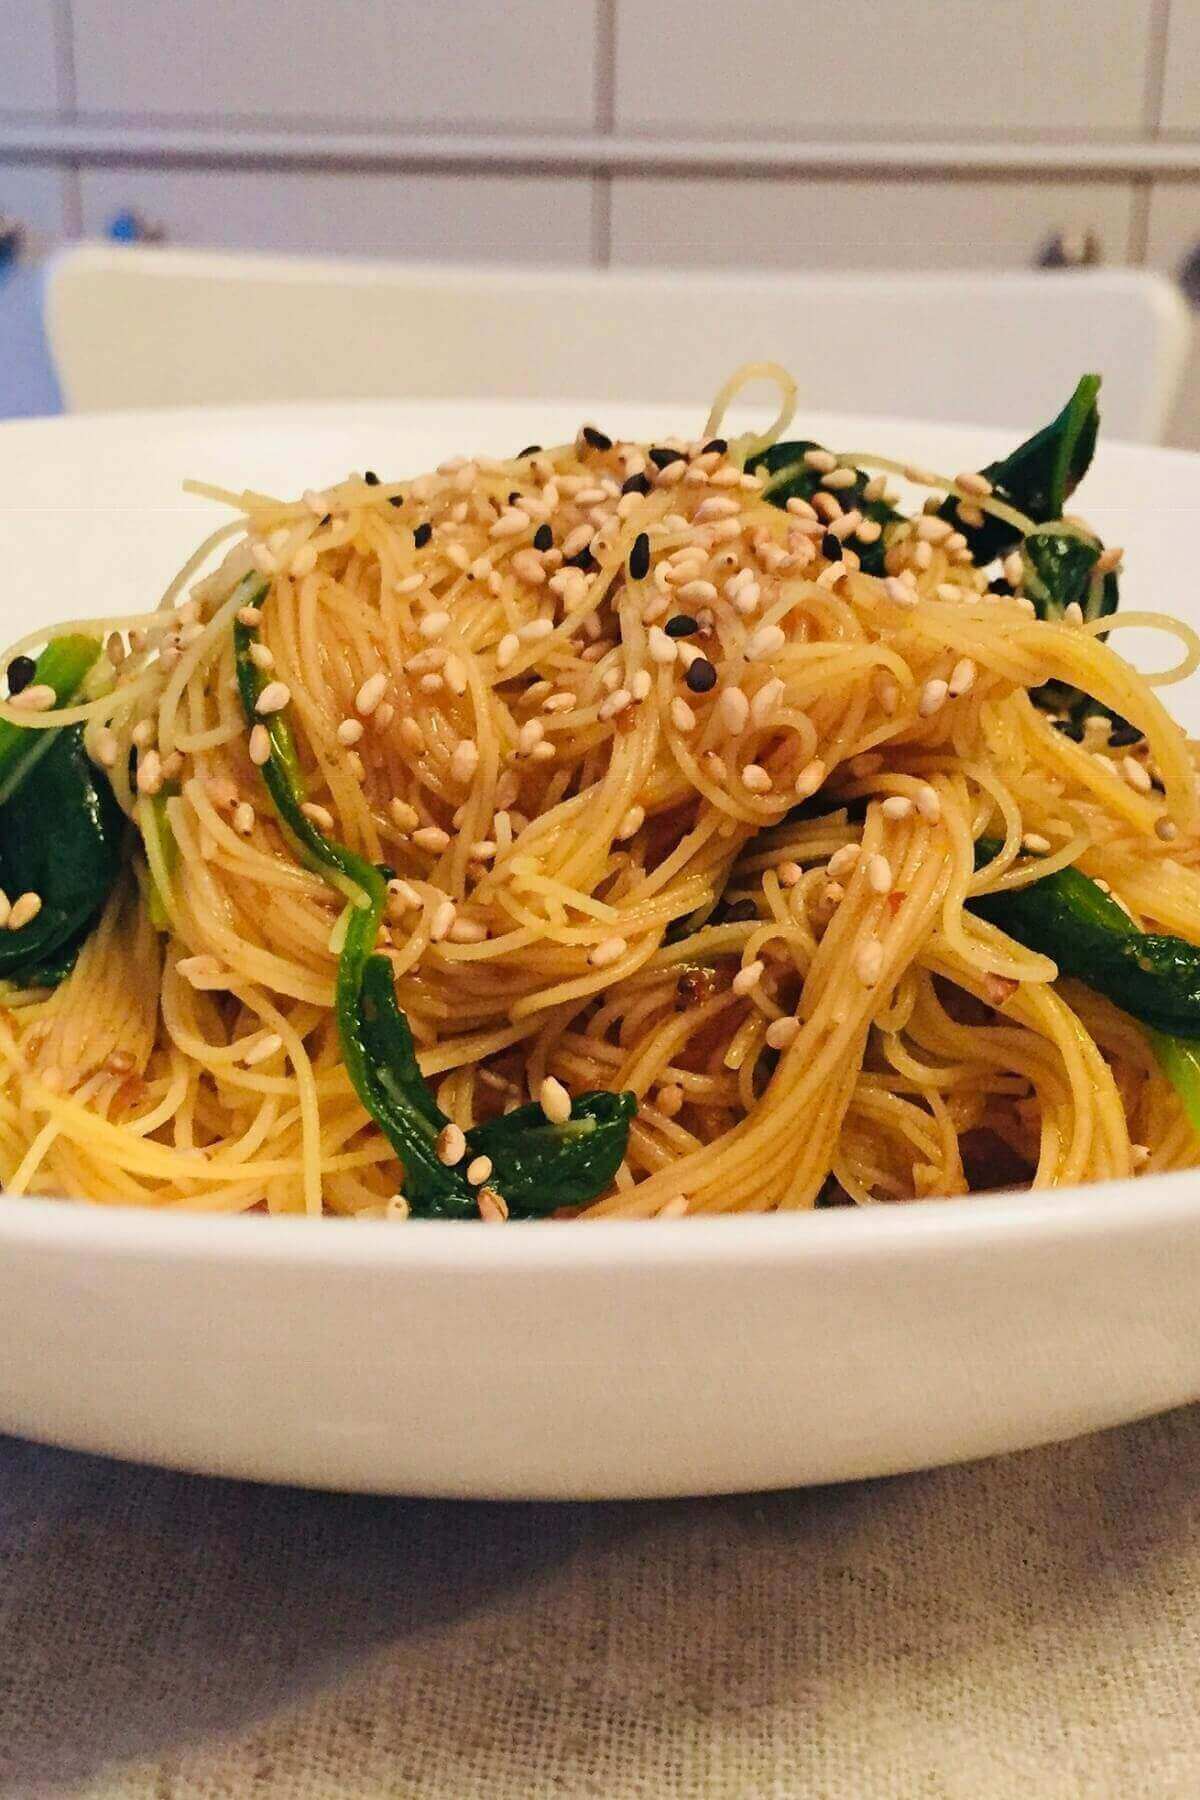 Noodles piled high in a white bowl.